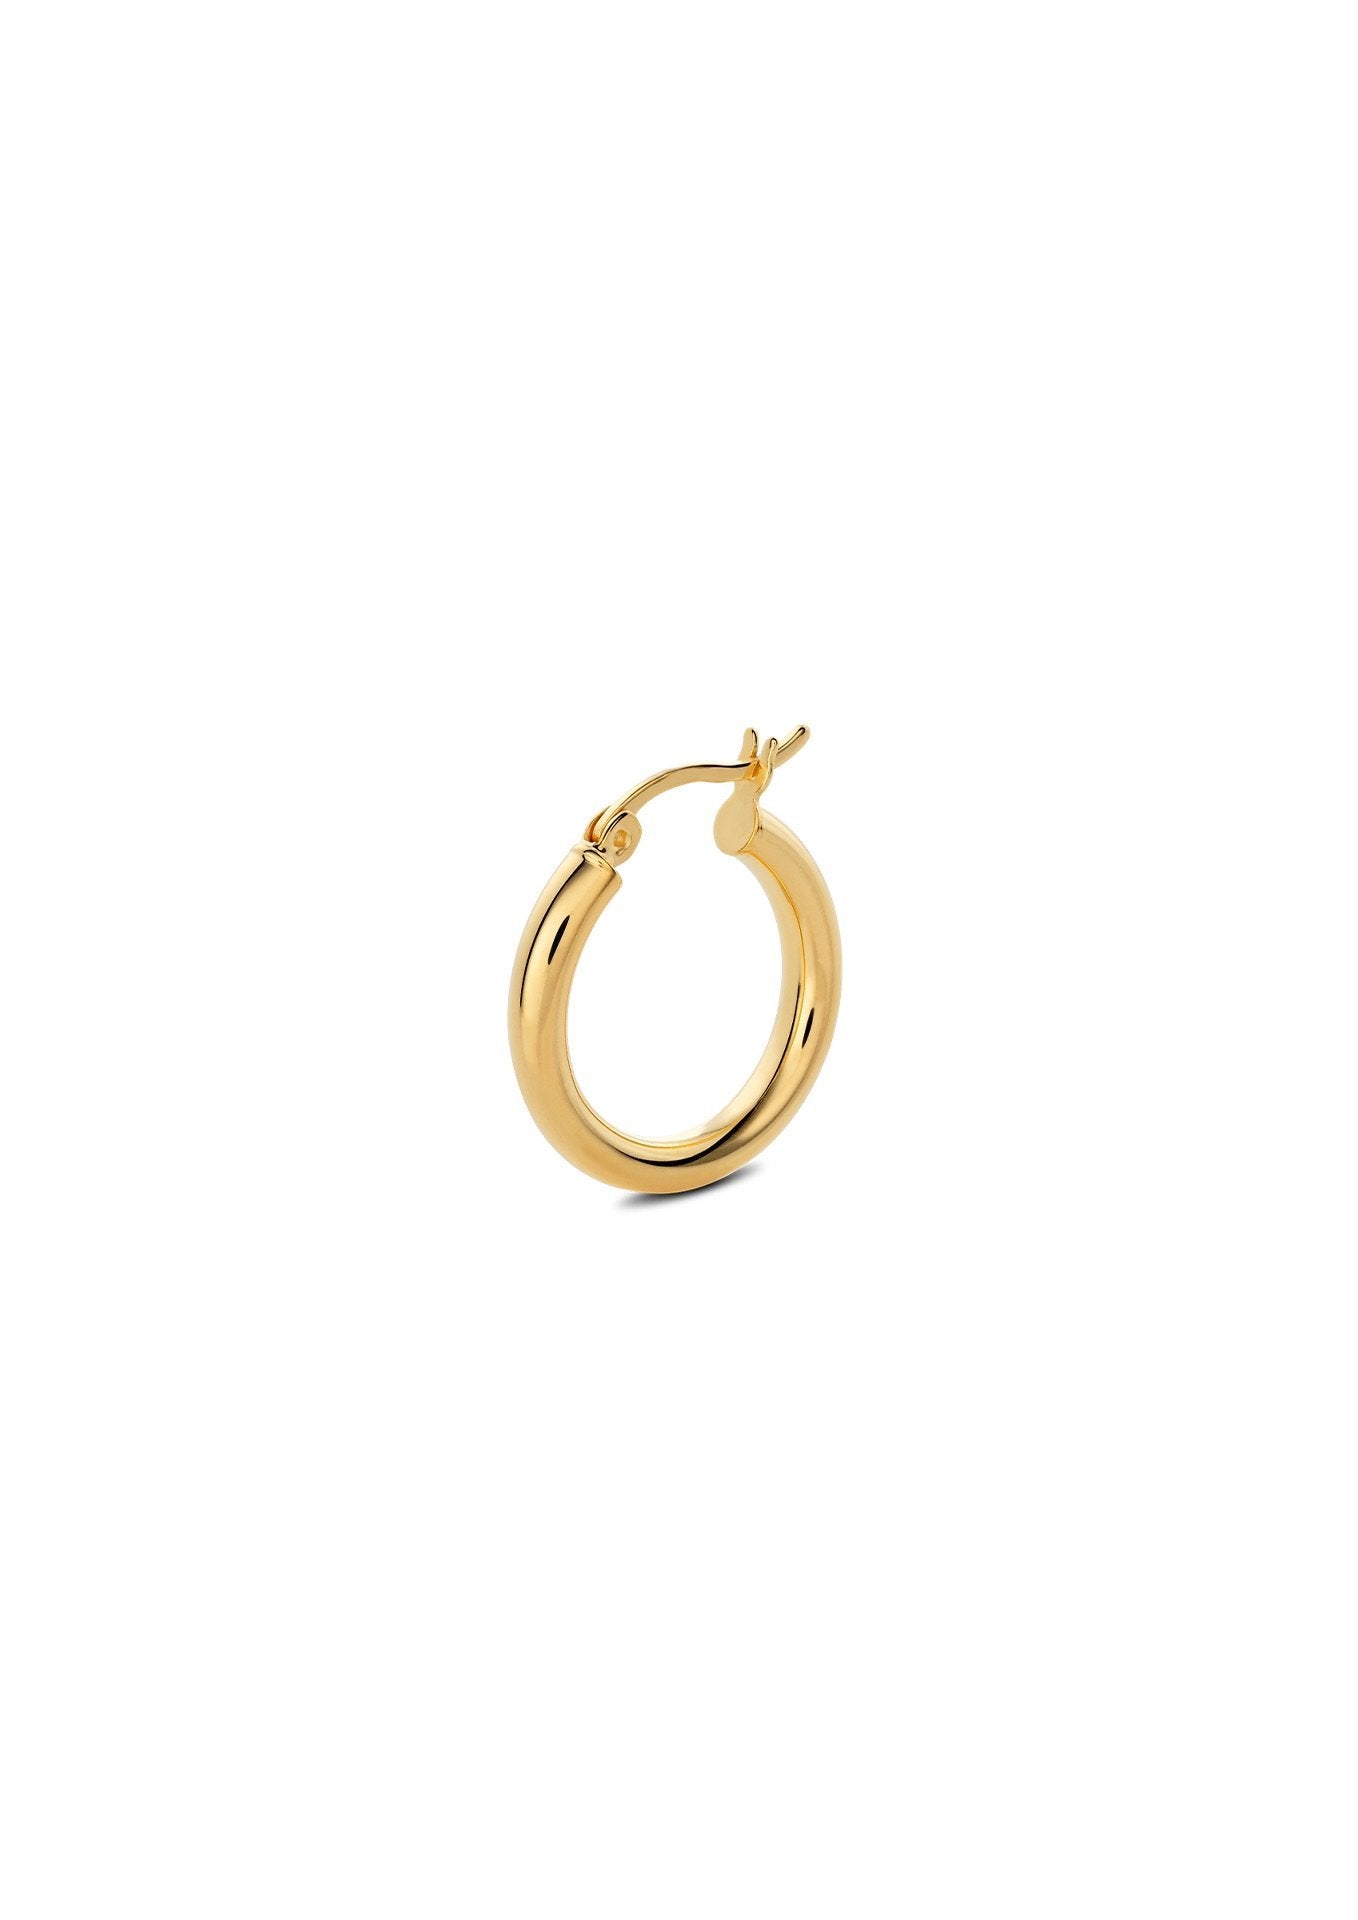 NO MORE accessories Dizzy Hoops in gold plating